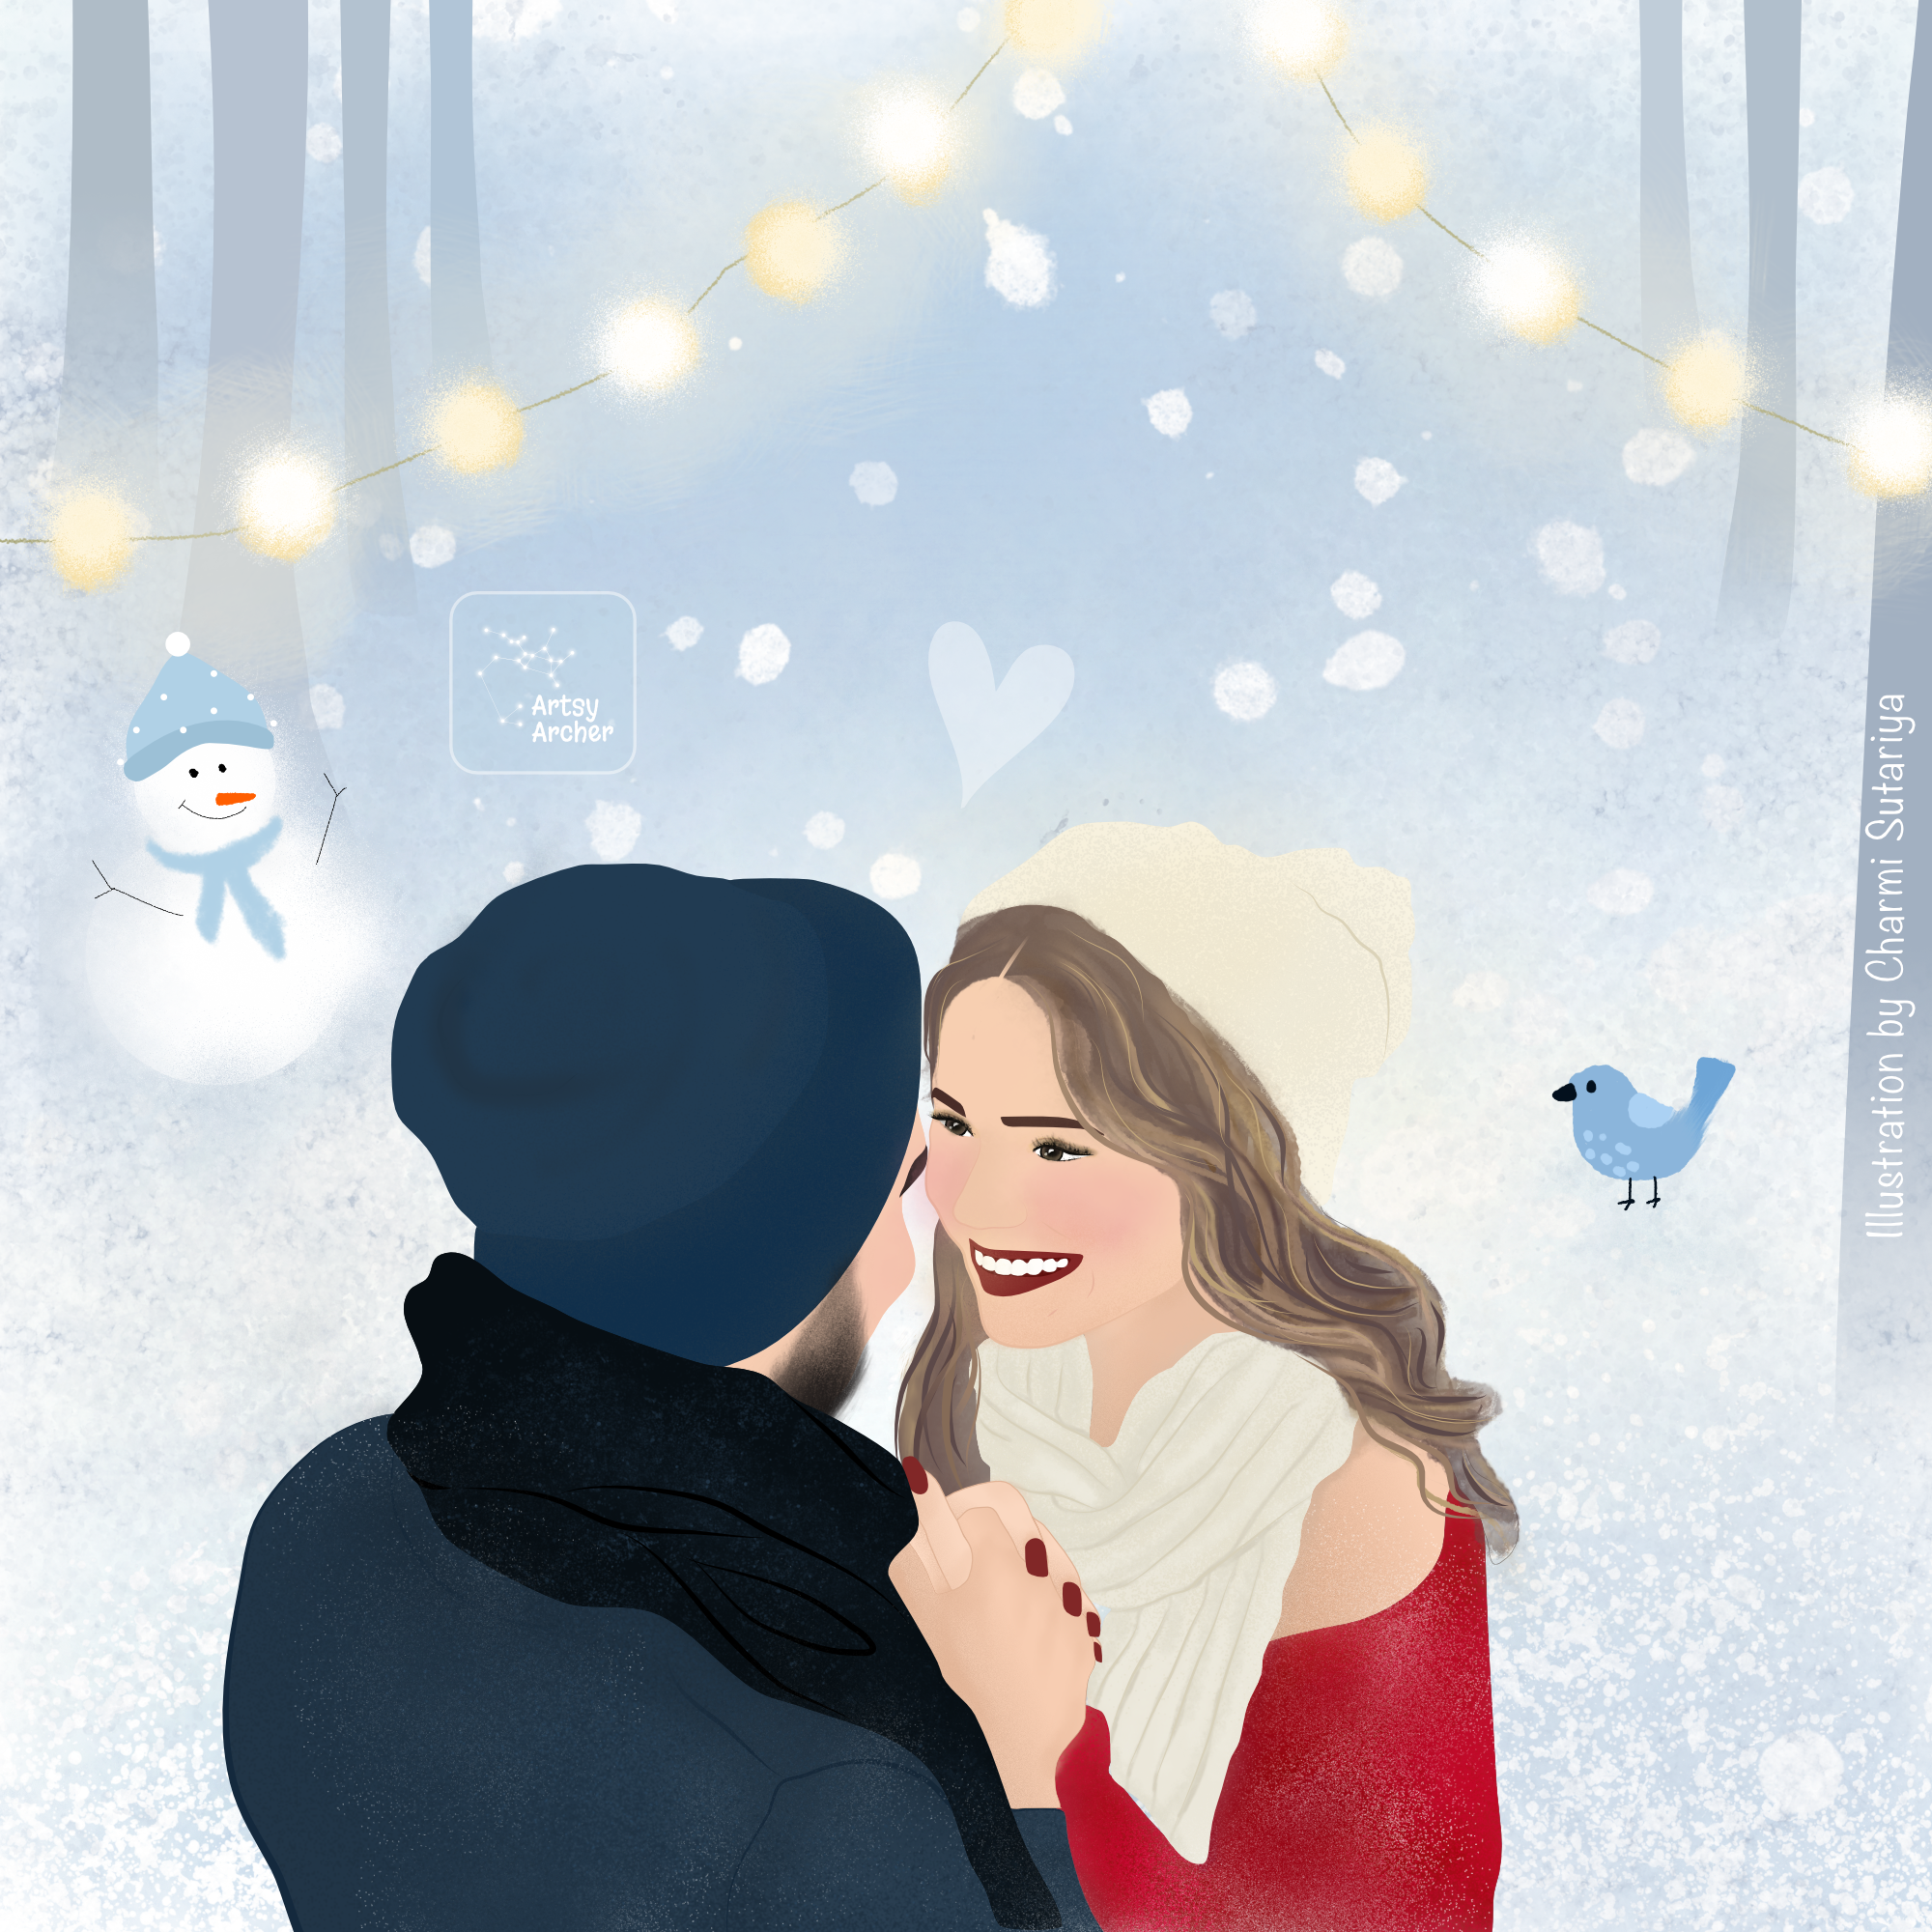 A romantic portrait illustration of a couple holding hands out in the magical snowfall winter night.